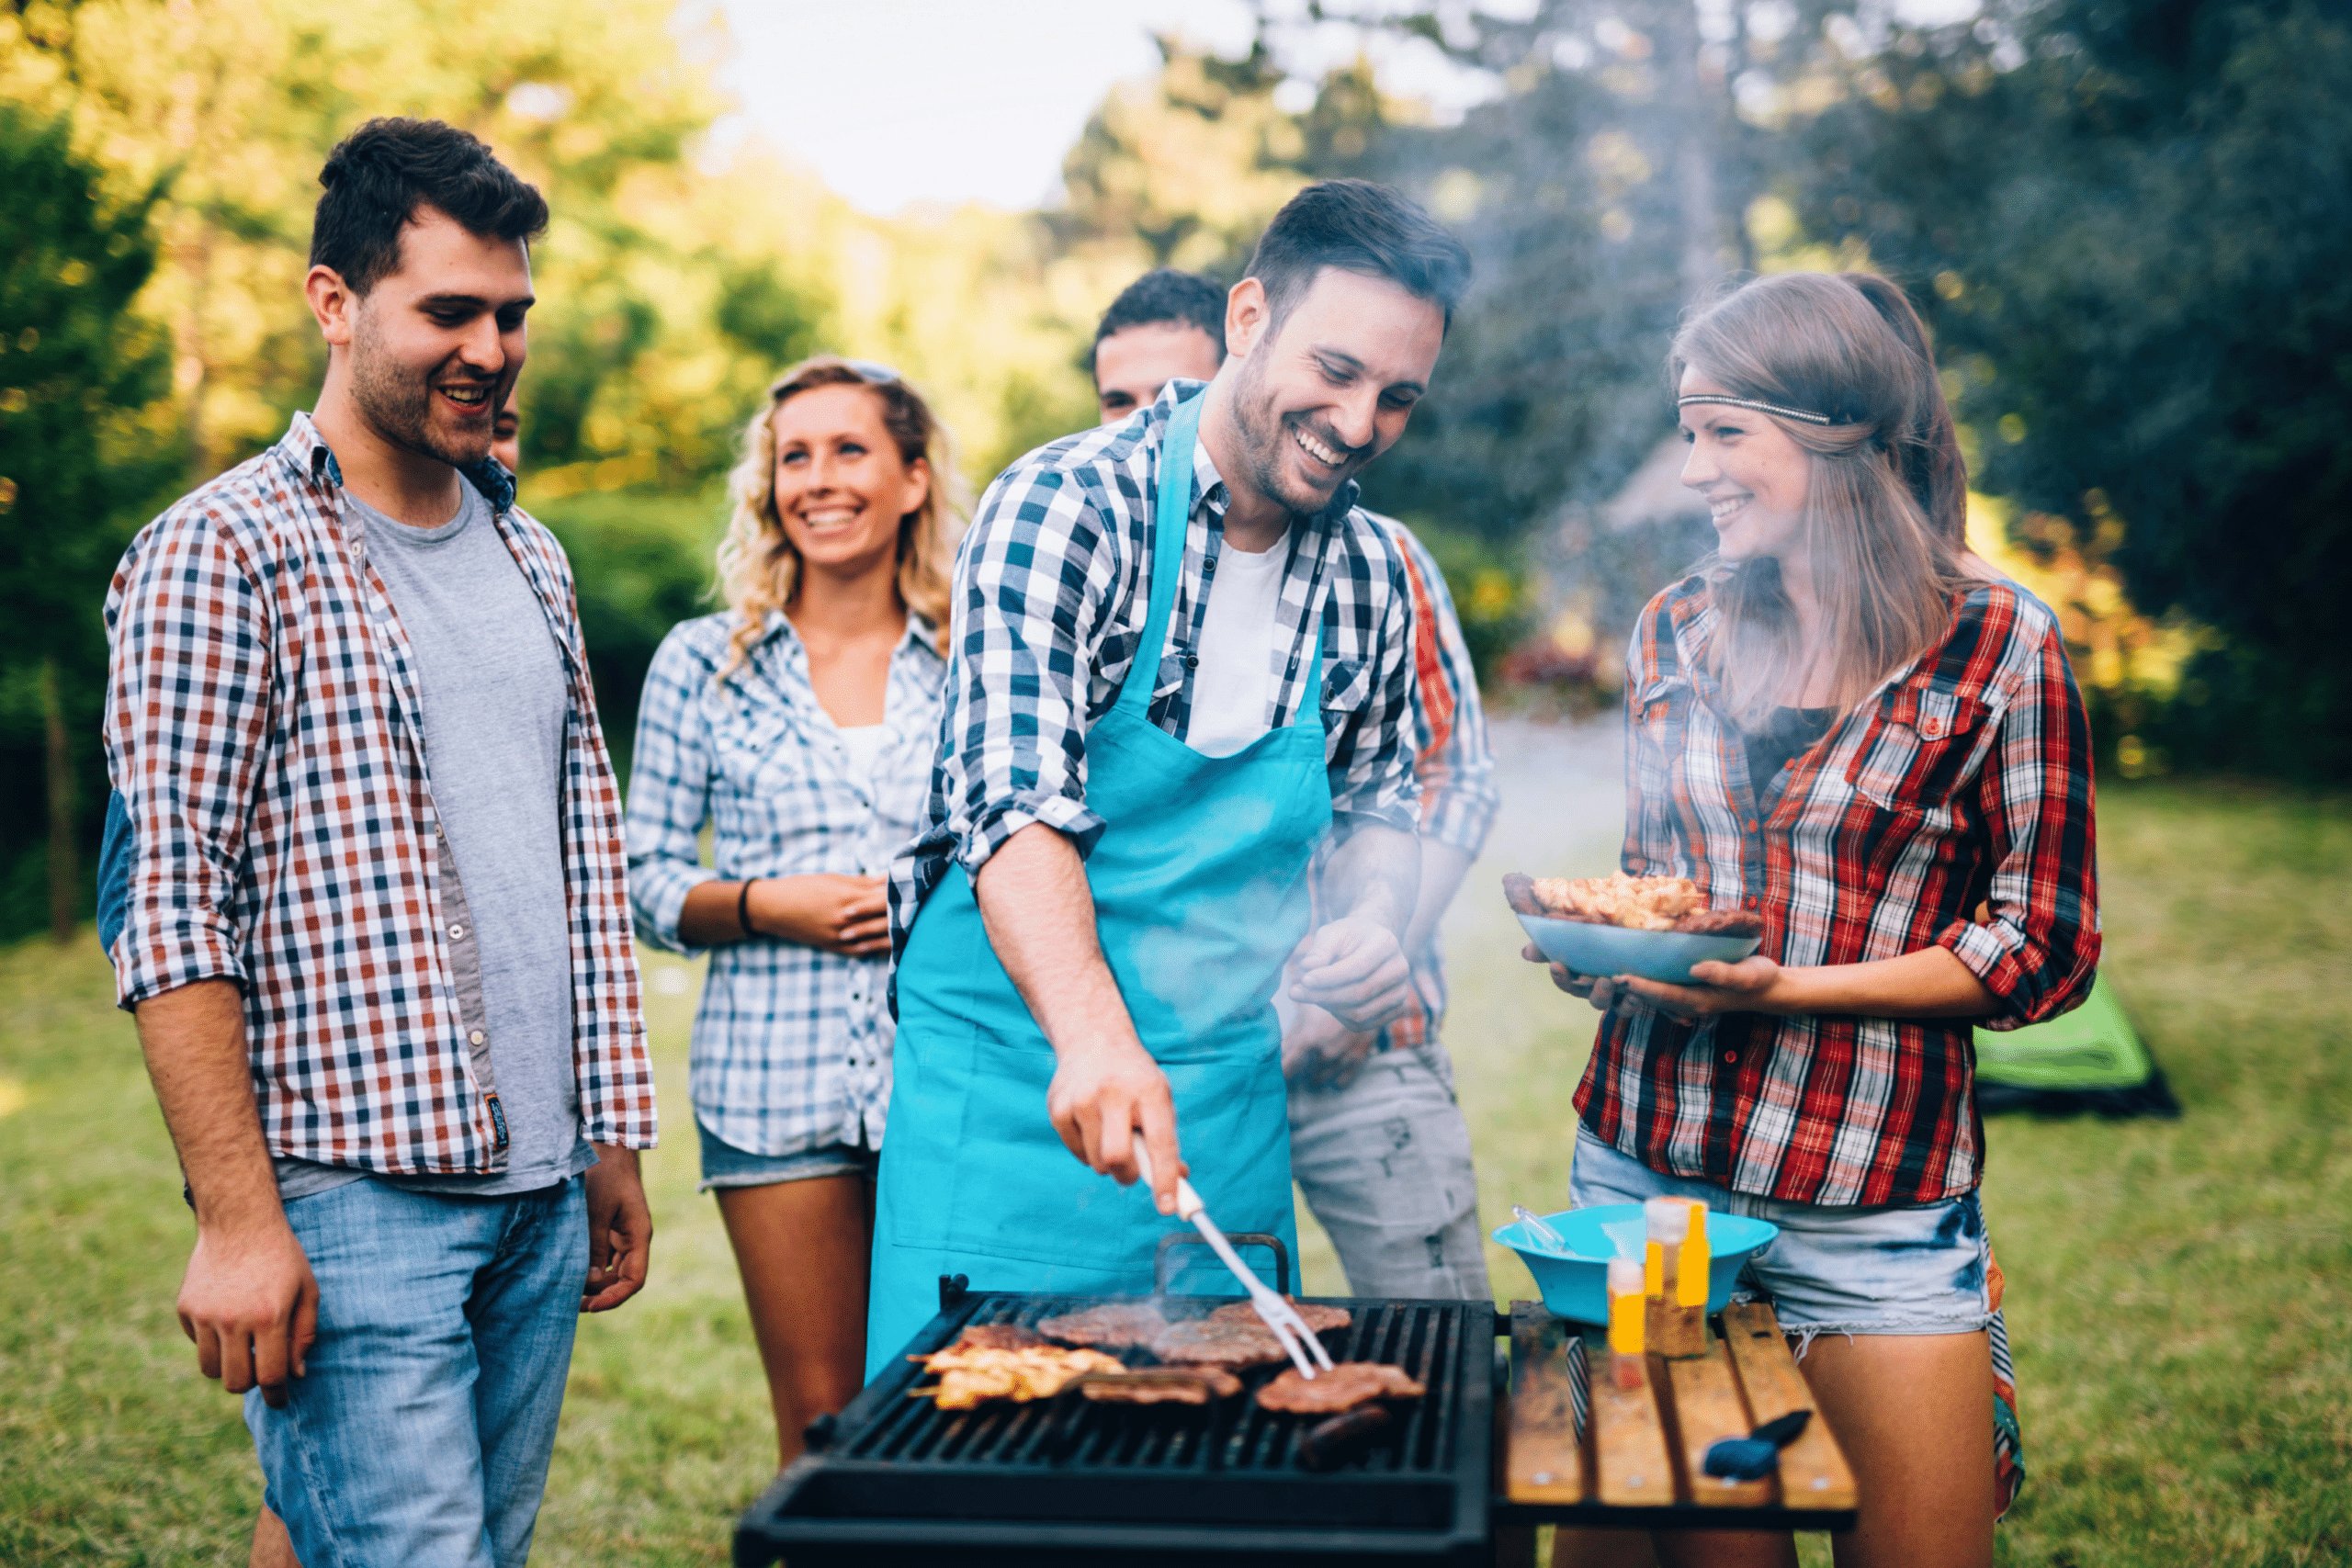 group of people grilling hamburgers outside